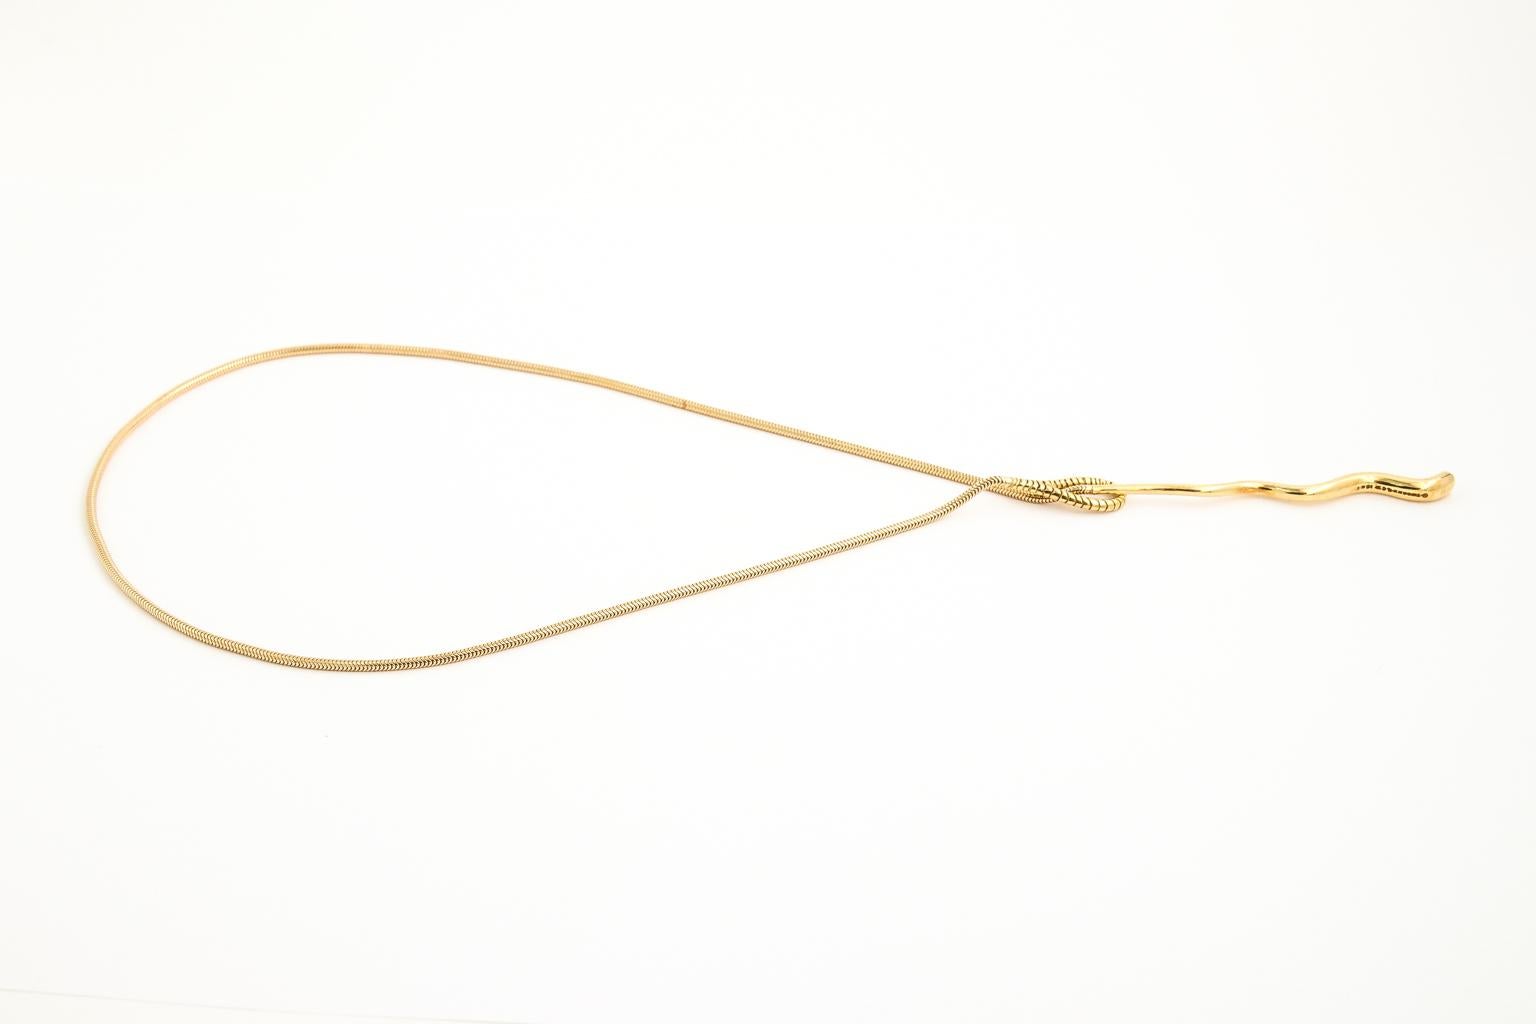 Vintage Tiffany & Co. 18 Karat Yellow Gold Snake Chain Lariat Toggle Necklace 1